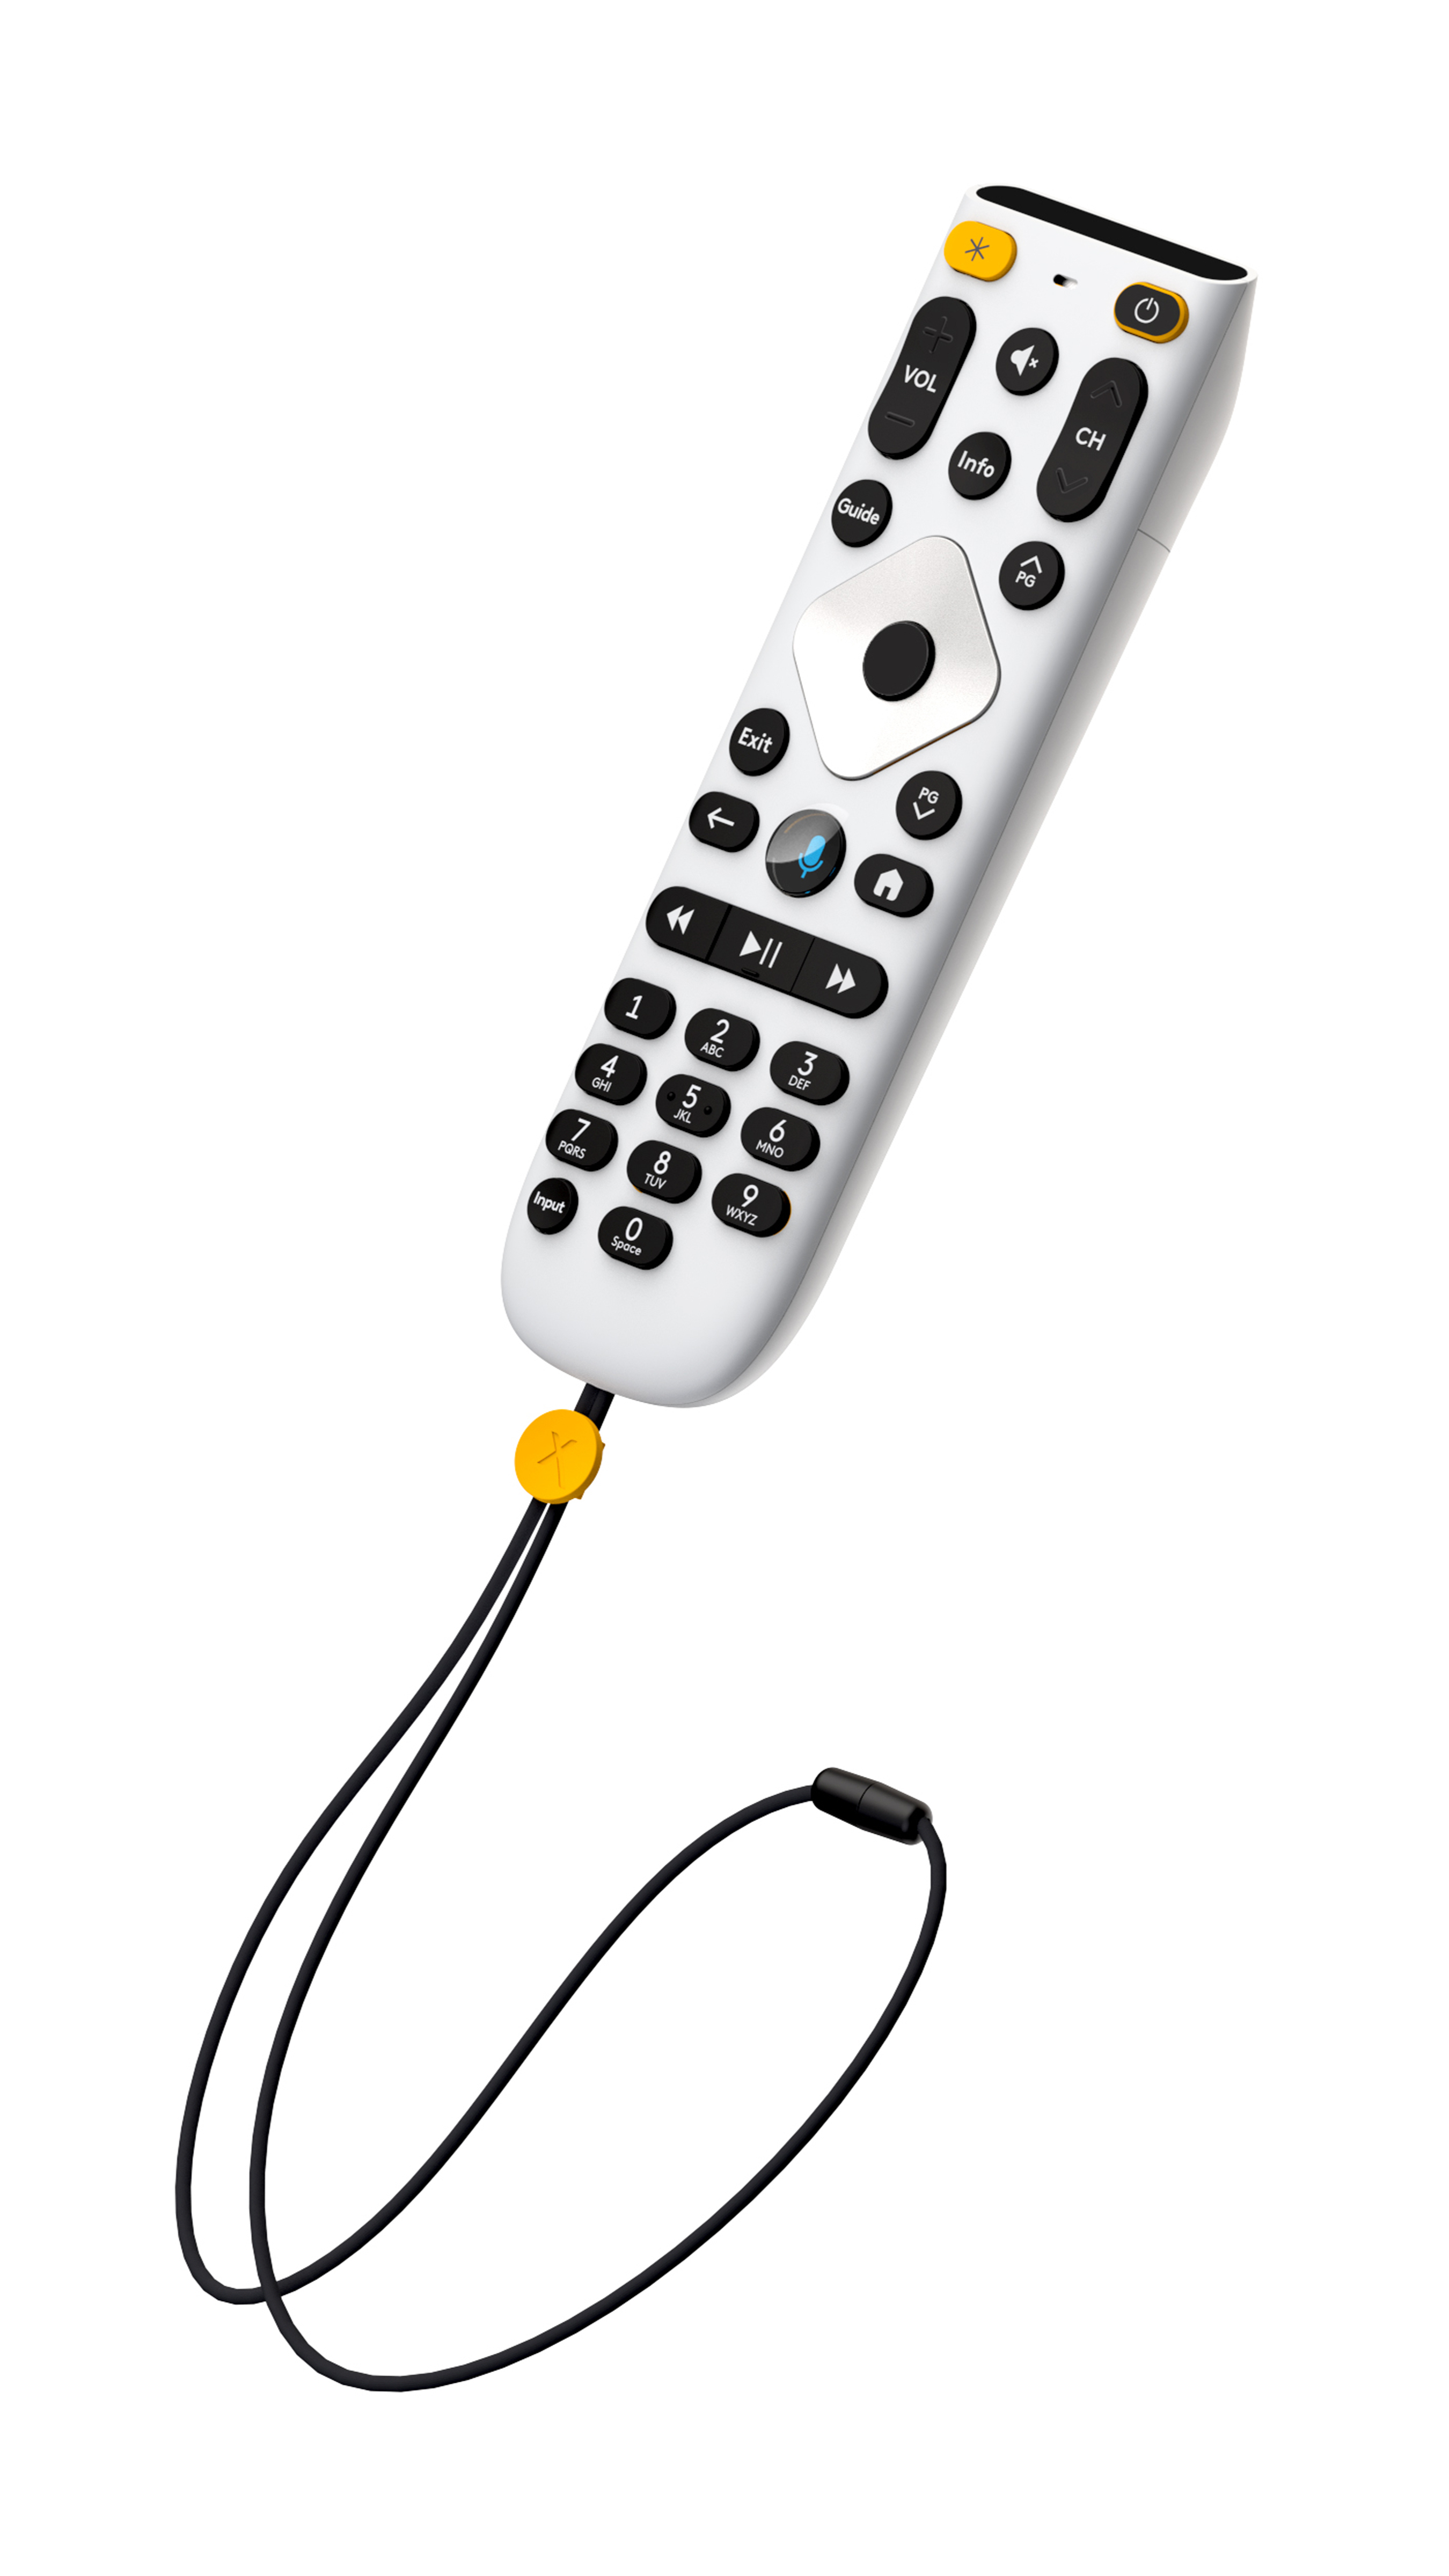 The Xfinity Large Button Voice Remote